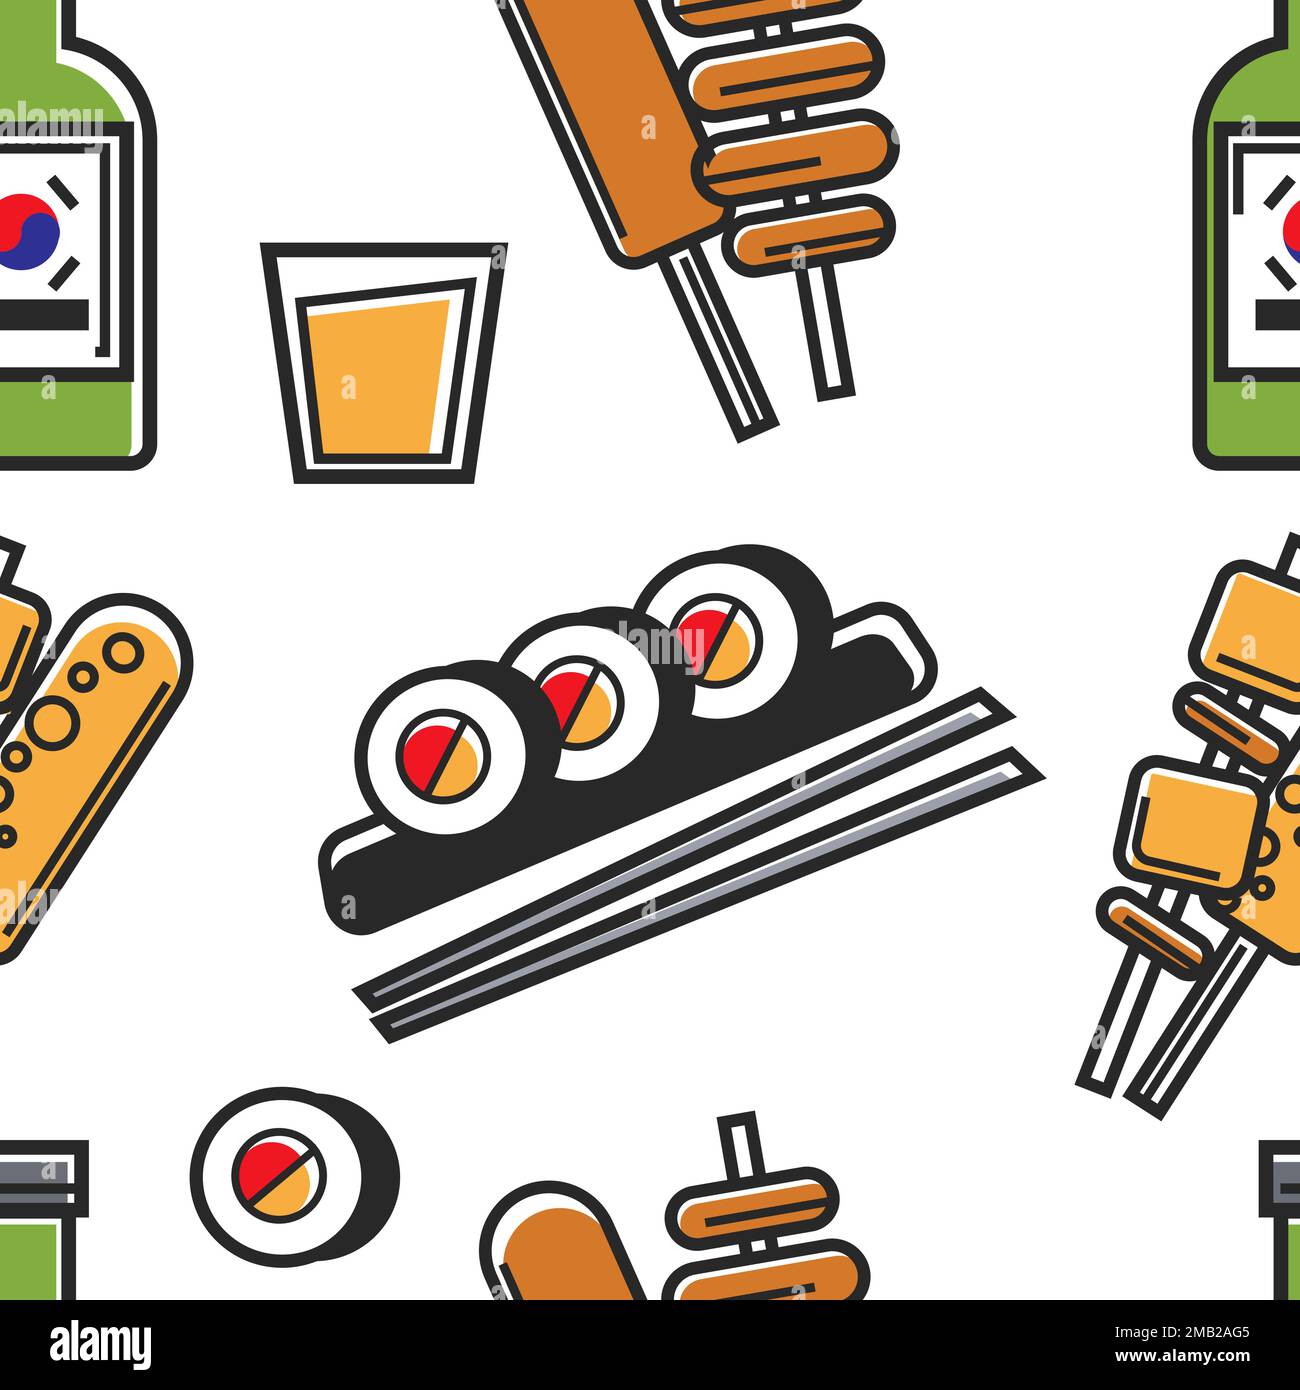 Sushi and deep fried fast food soju drink Korean food seamless pattern street meals on stick or skewer alcohol beverage and rolls with chopsticks endl Stock Vector